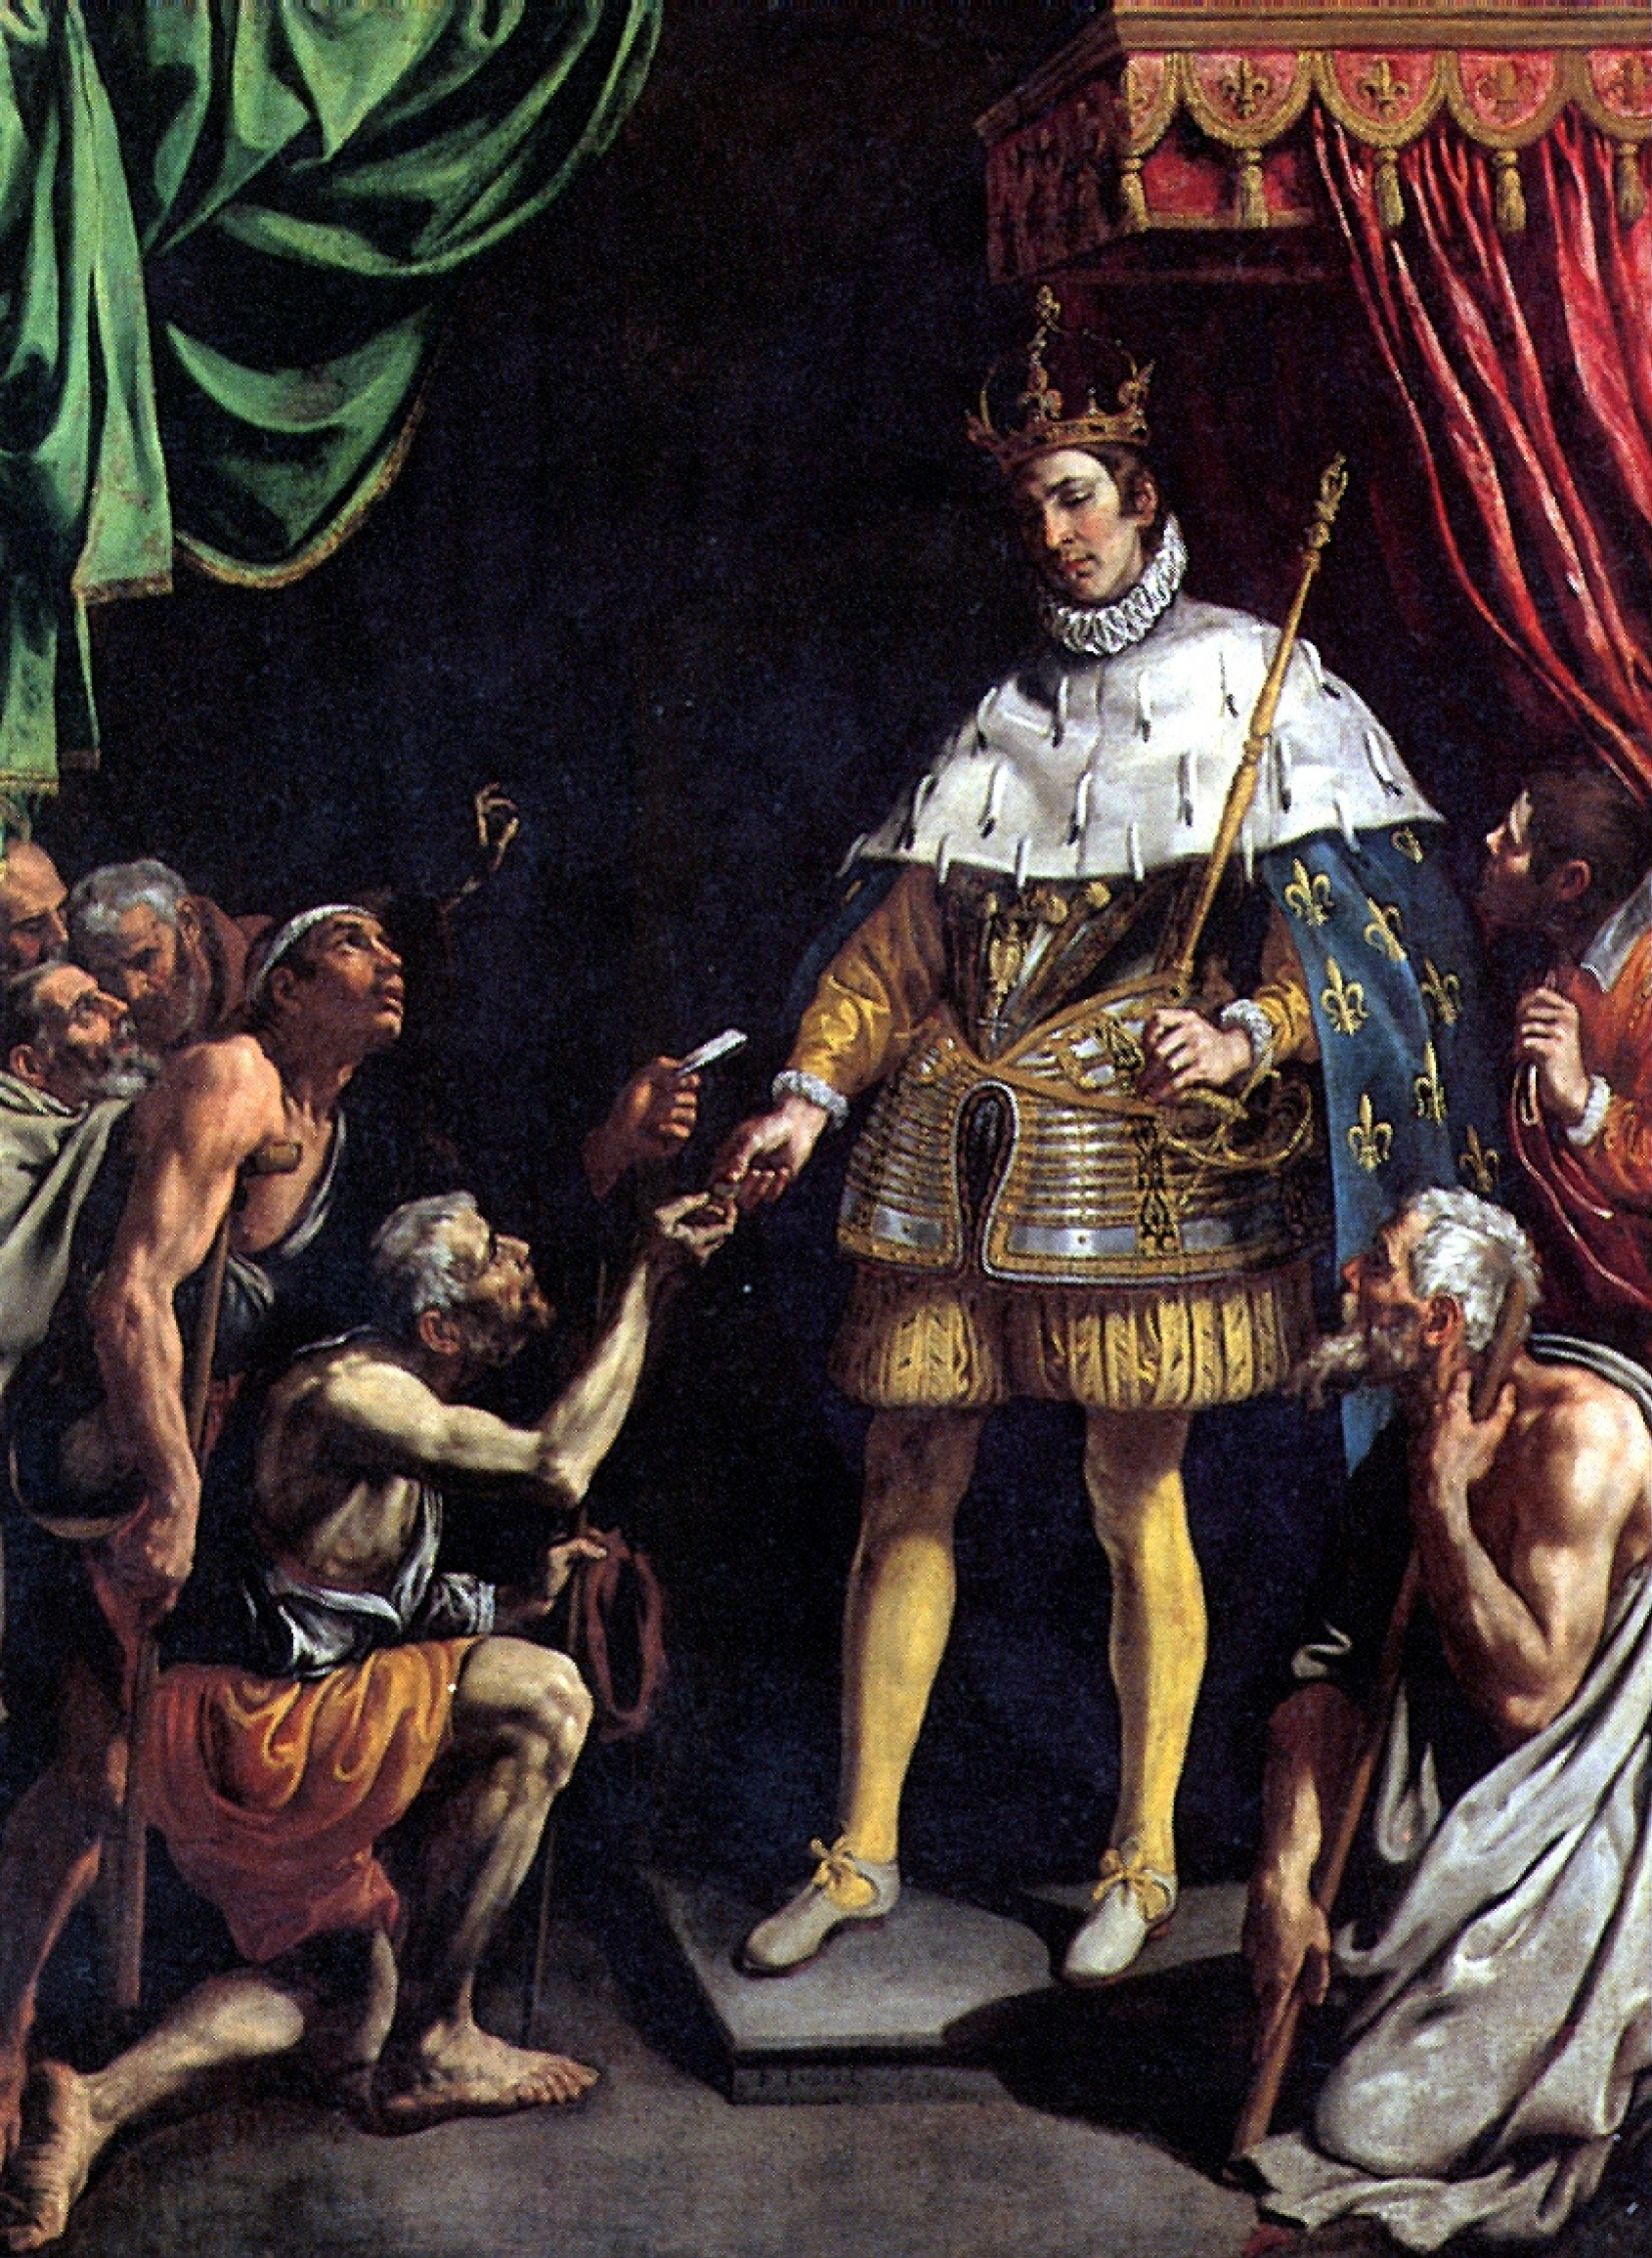 St. Louis king of France distributing alms, 245×183 cm by Luis